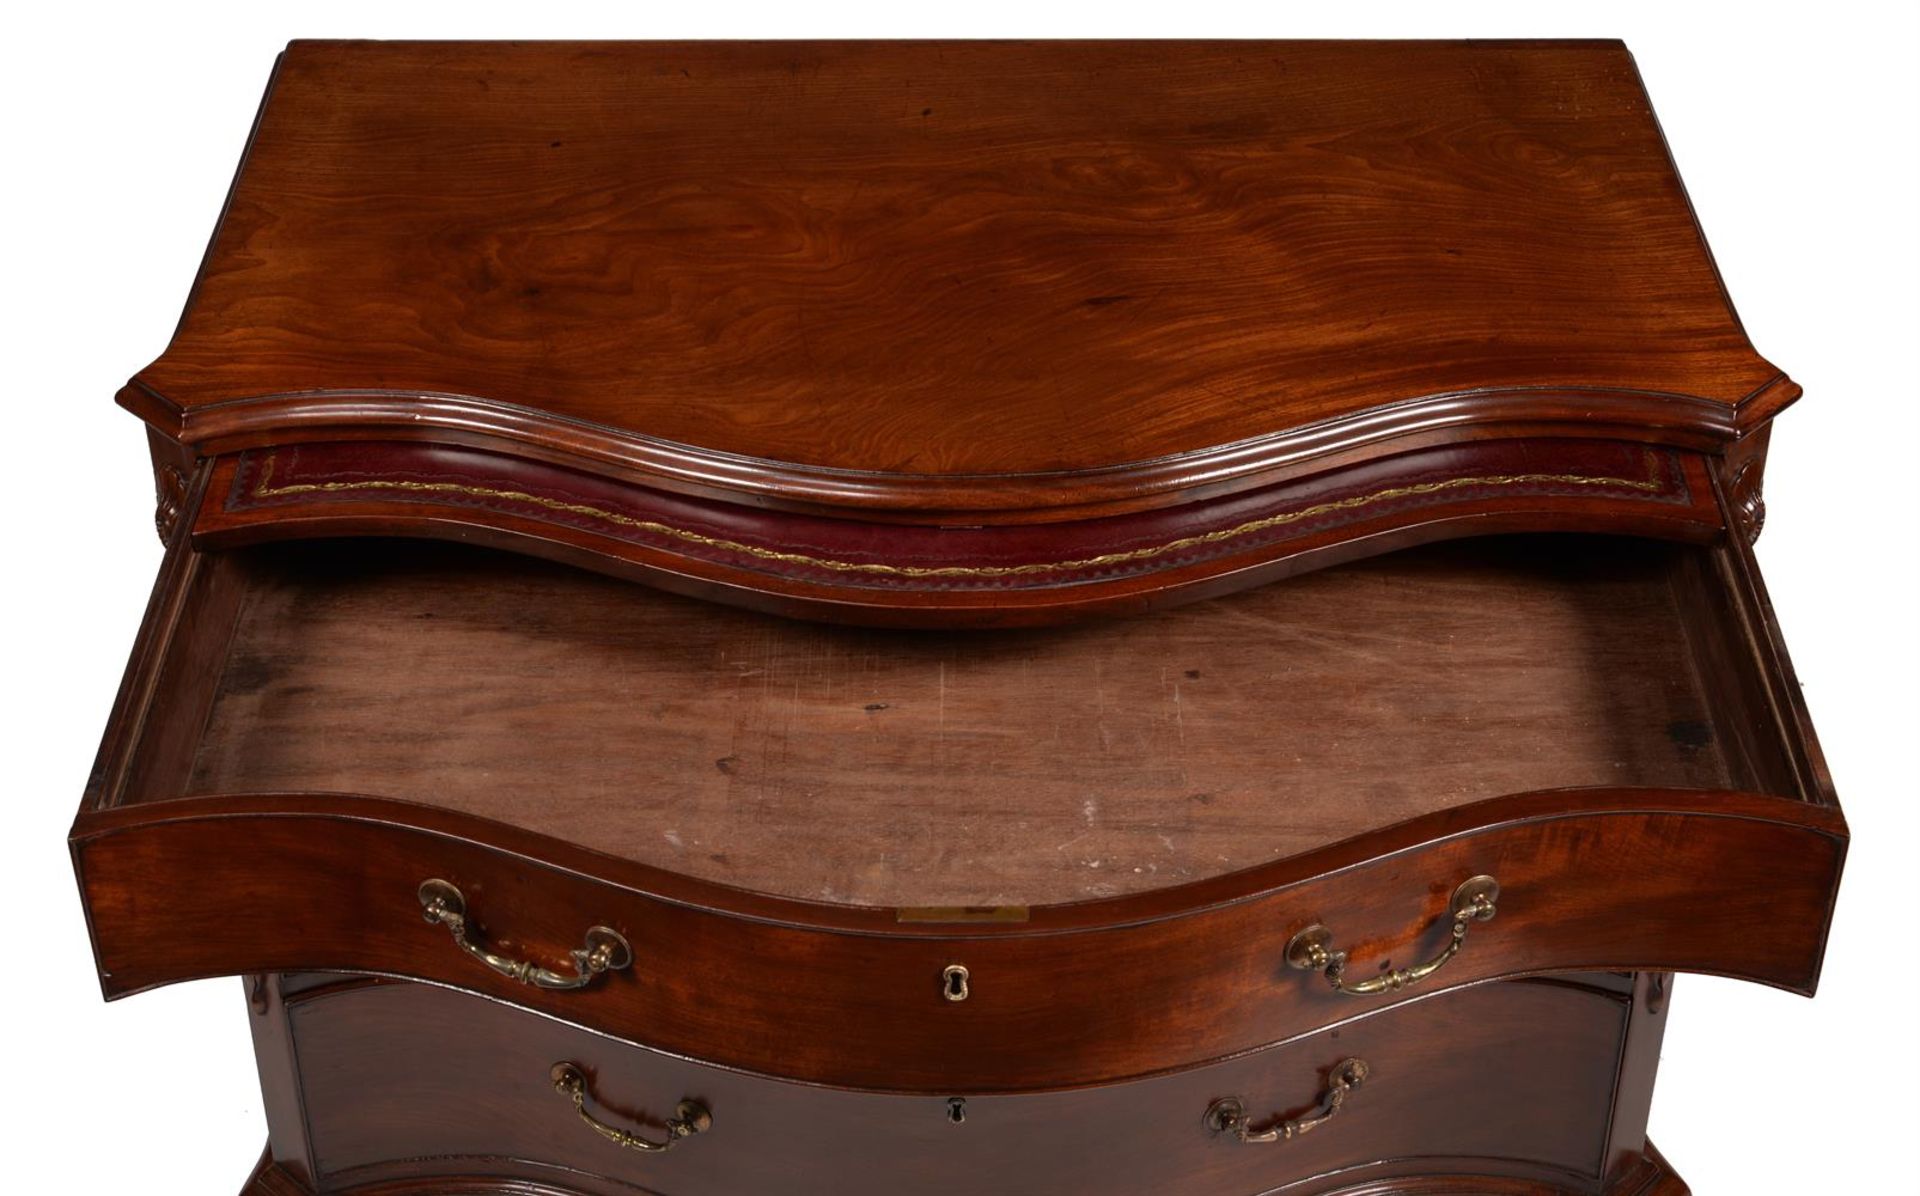 A GEORGE III MAHOGANY SERPENTINE COMMODE, IN THE MANNER OF THOMAS CHIPPENDALE, CIRCA 1770 - Image 7 of 9